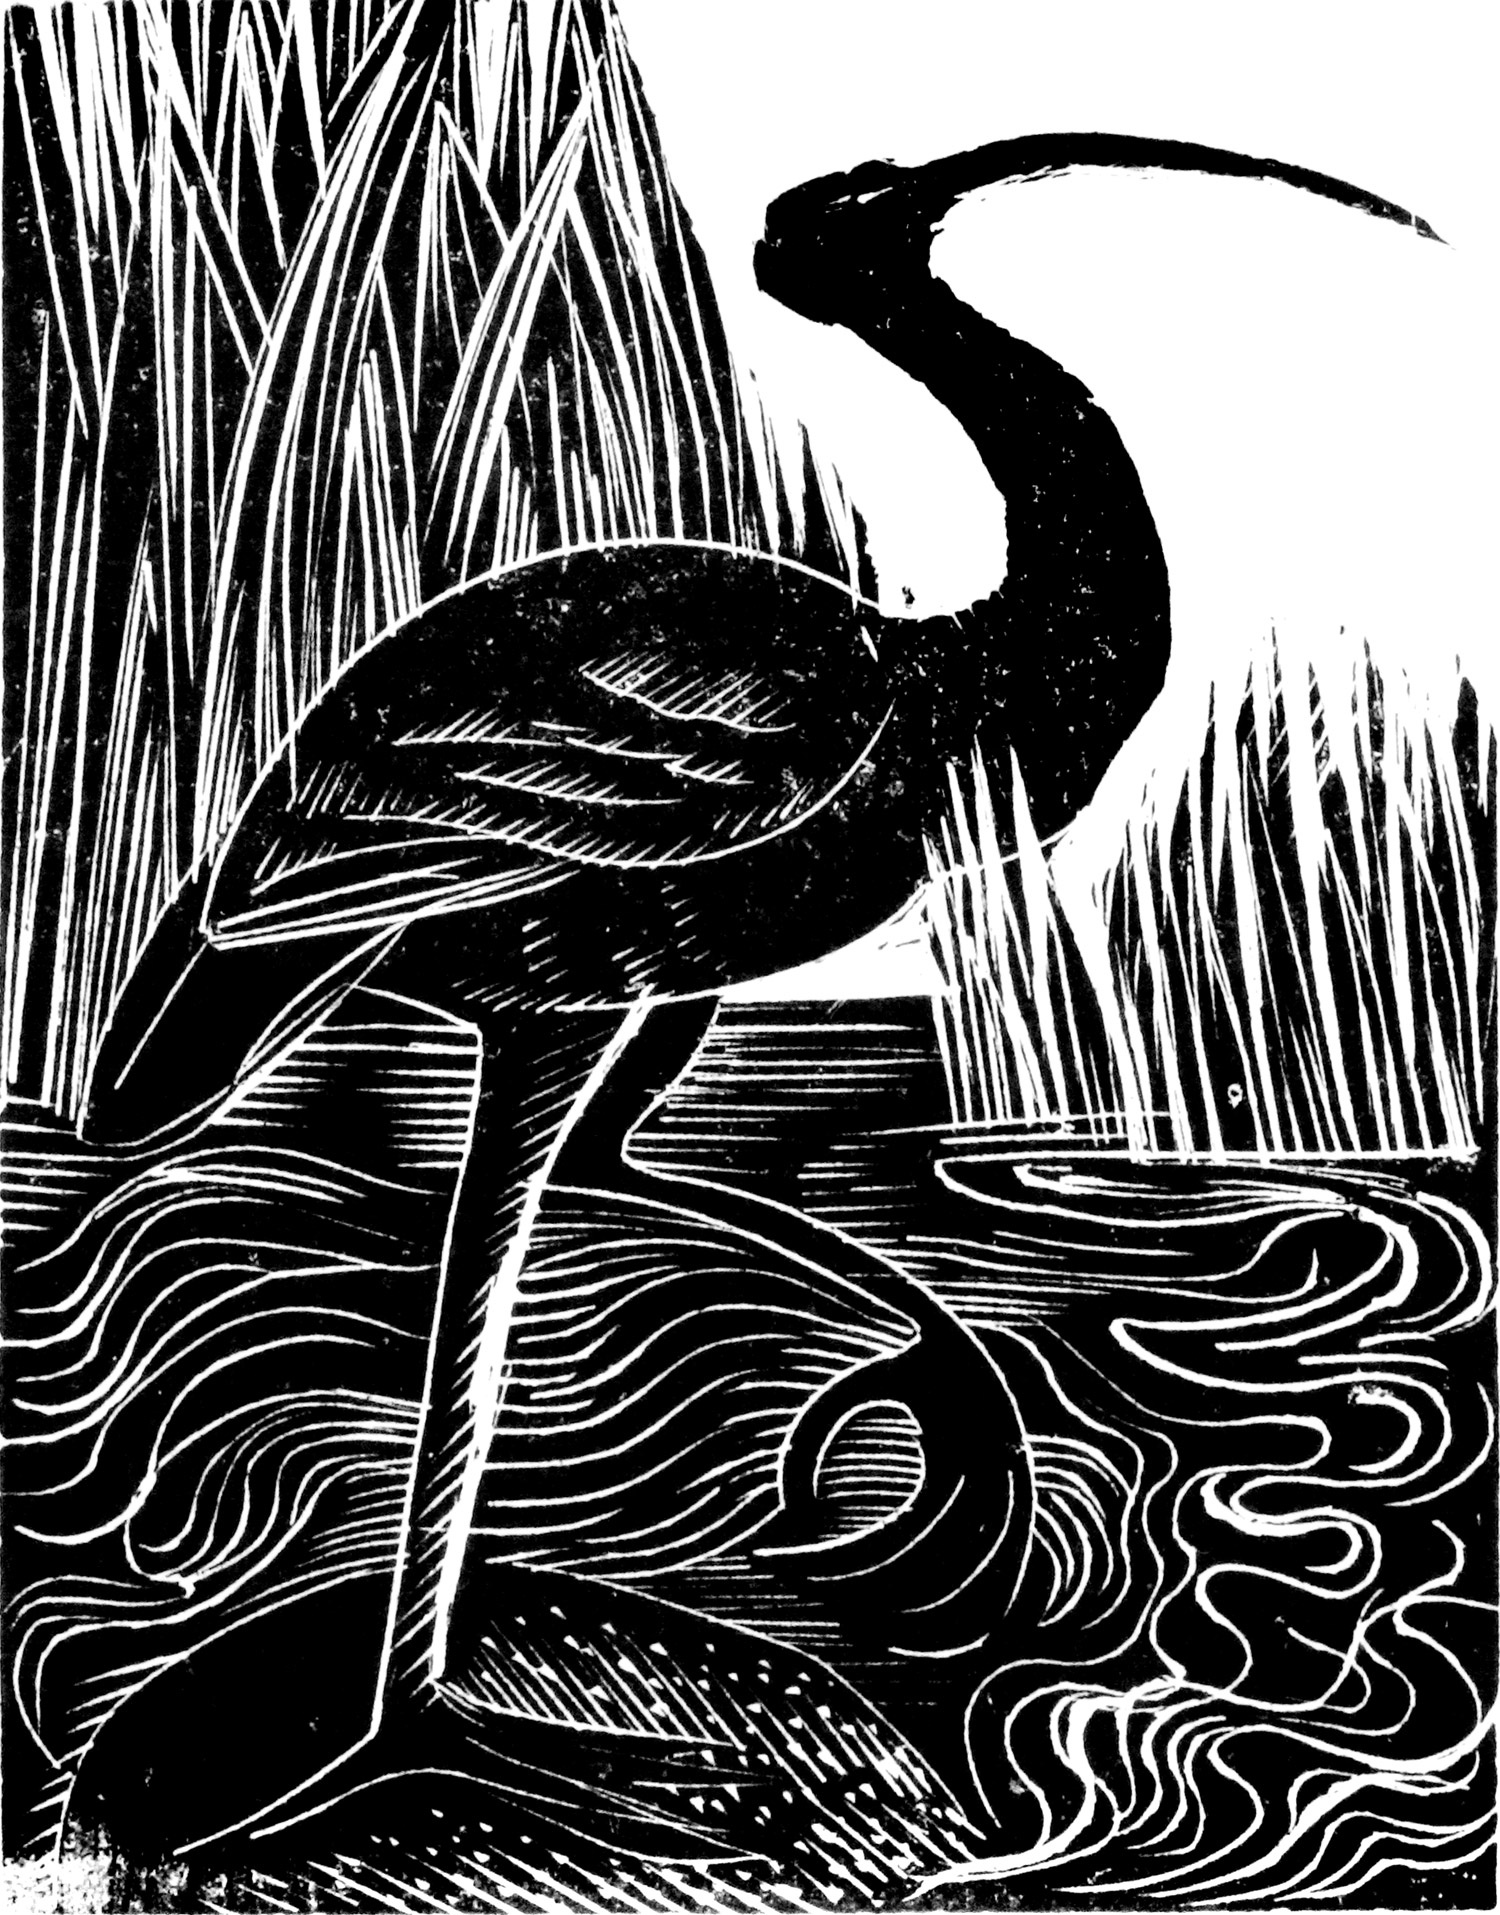 I is for Ibis by Angela Harding